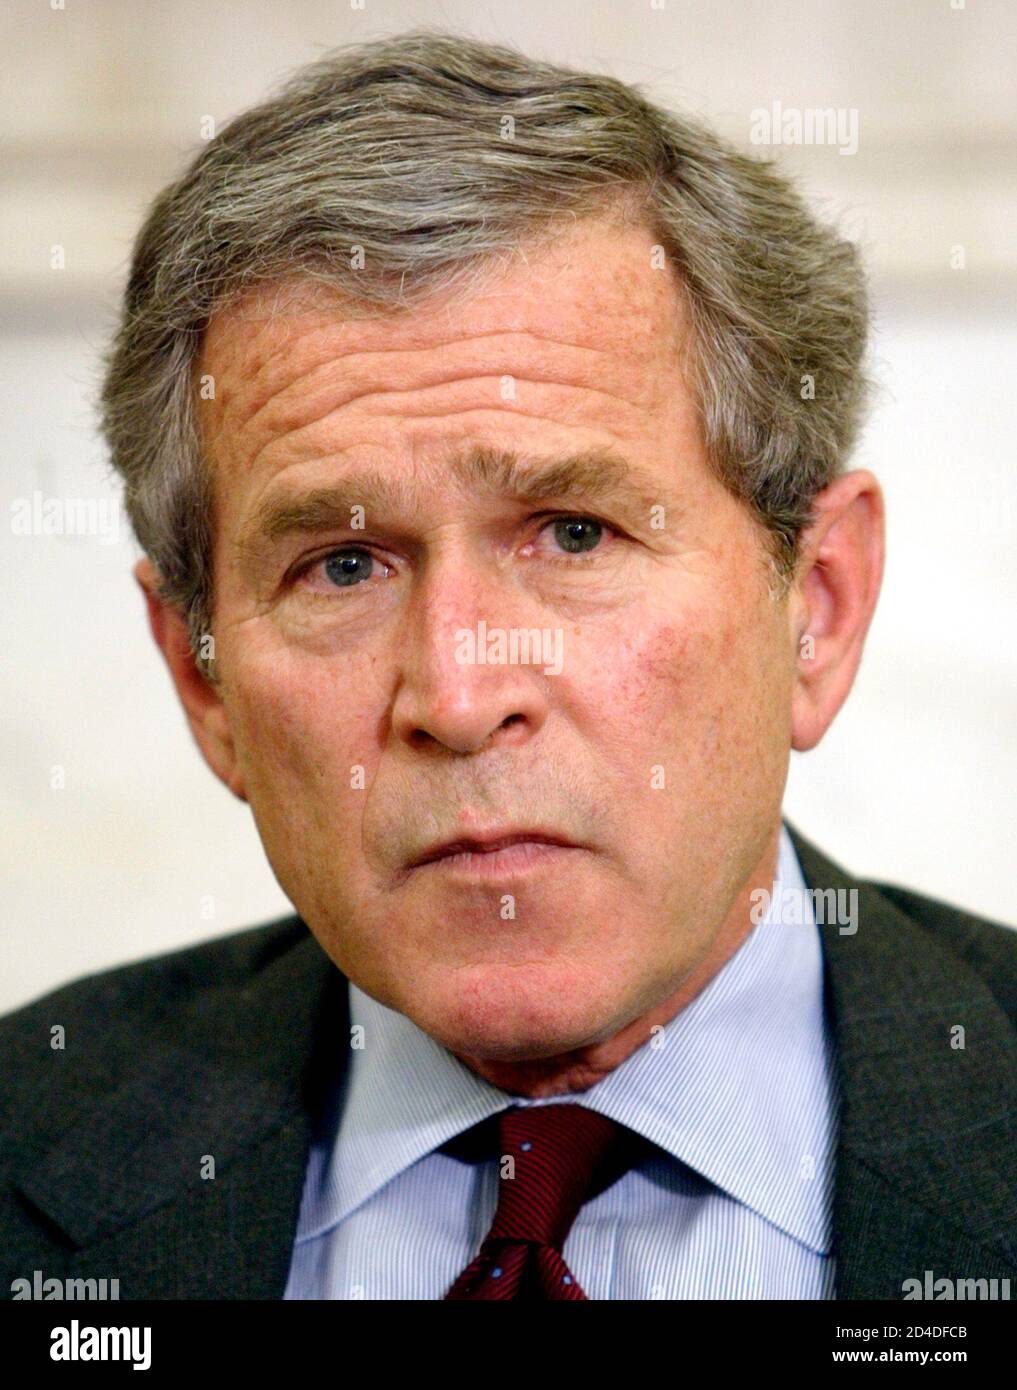 President George W. Bush looks up during a meeting with congressional leaders in the Oval Office of the White House March 21, 2003. Bush held the meeting to brief the leaders on the war in Iraq and to discuss domestic issues. The White House today said that the war in Iraq could still be 'lengthy and dangerous' and there were 'many risks ahead' for U.S. and British forces. REUTERS/Kevin Lamarque  KL Stock Photo